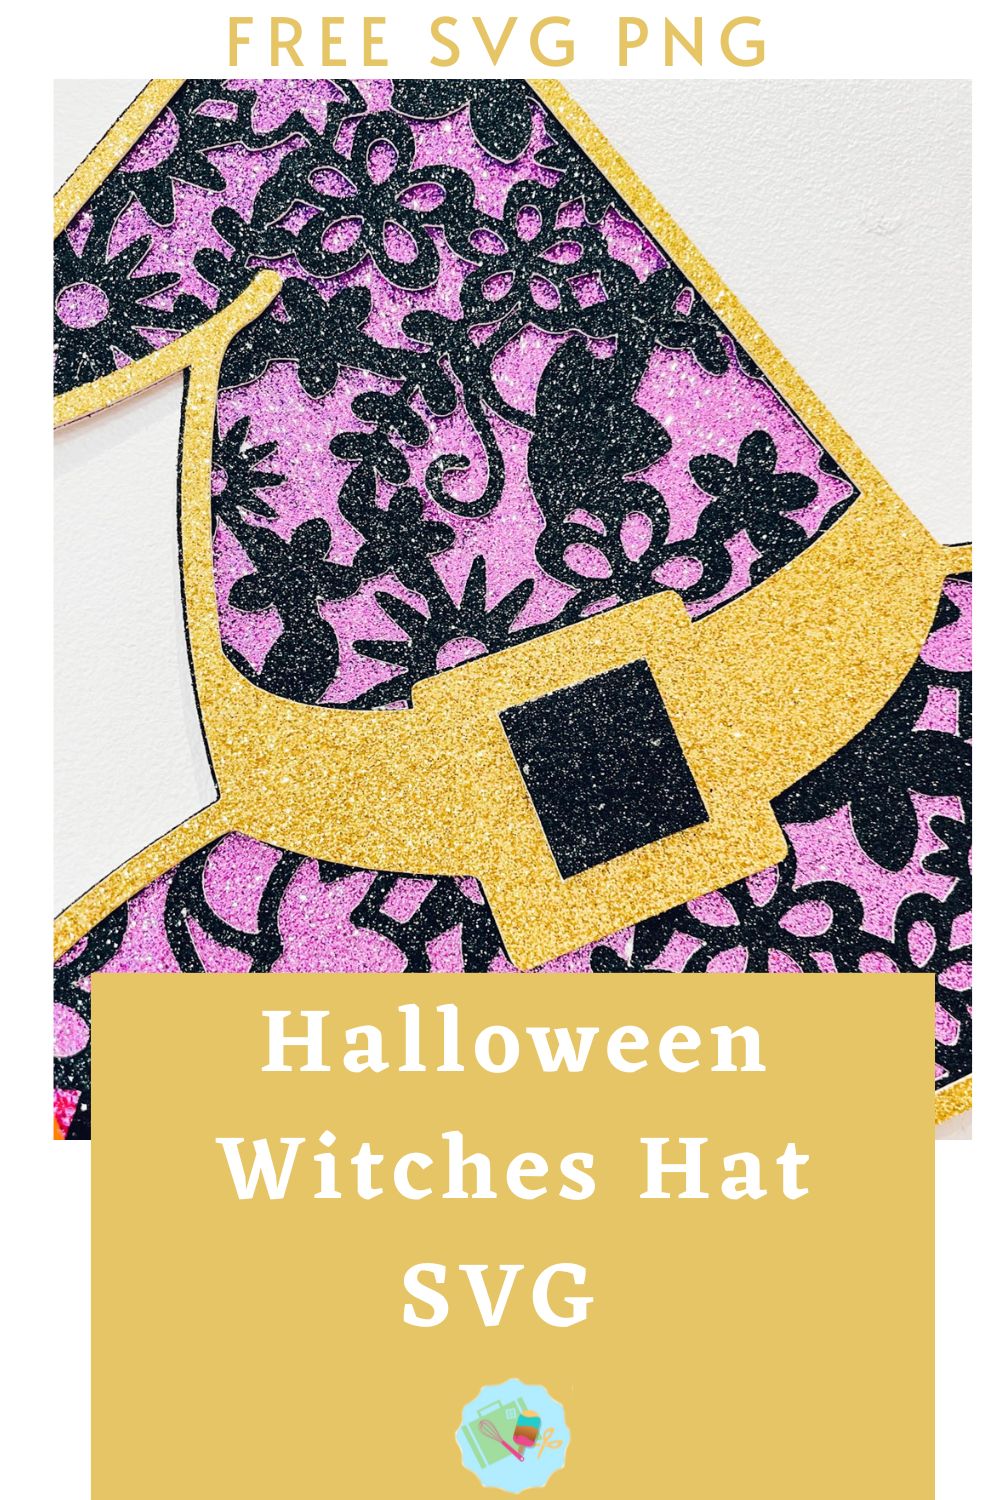 Free Halloween Witches Hat SVG, PNG for Cricut, Glowforge and Silhouette